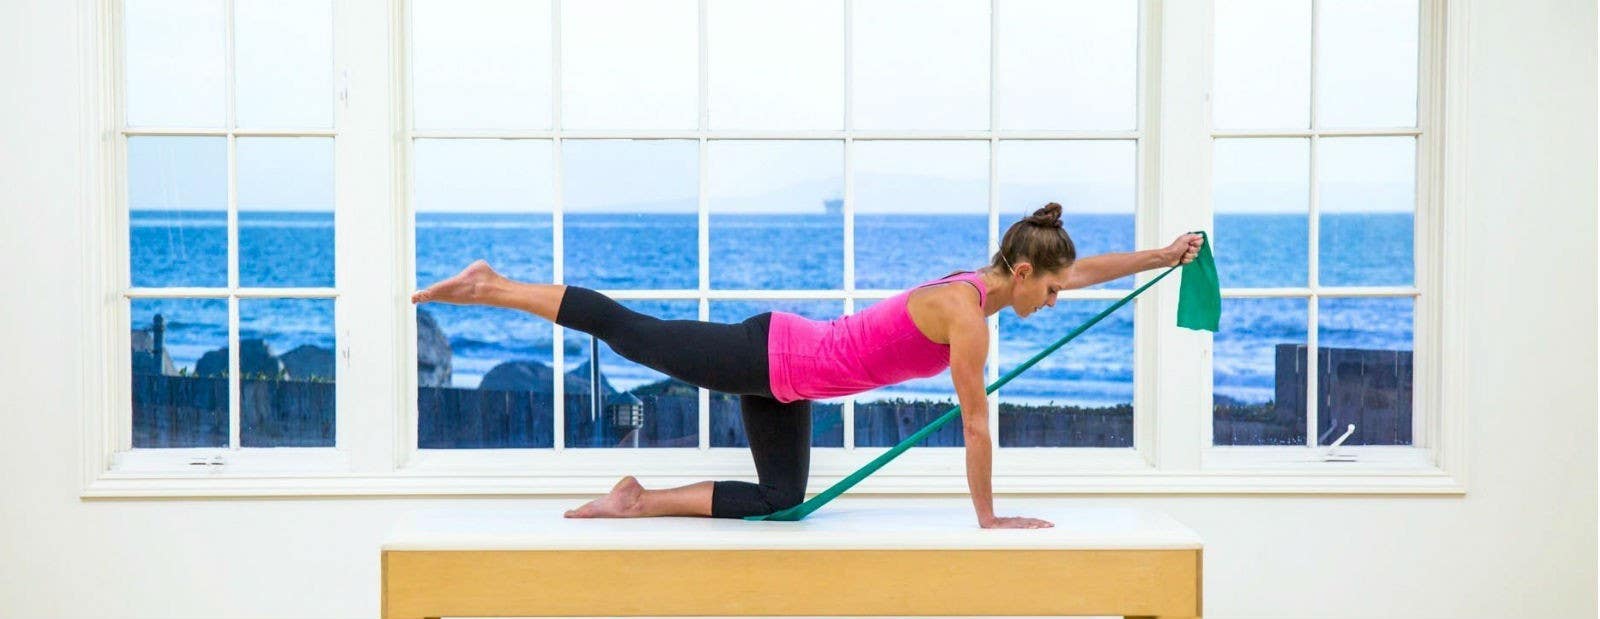 Pilates Mat Workouts for Every Level